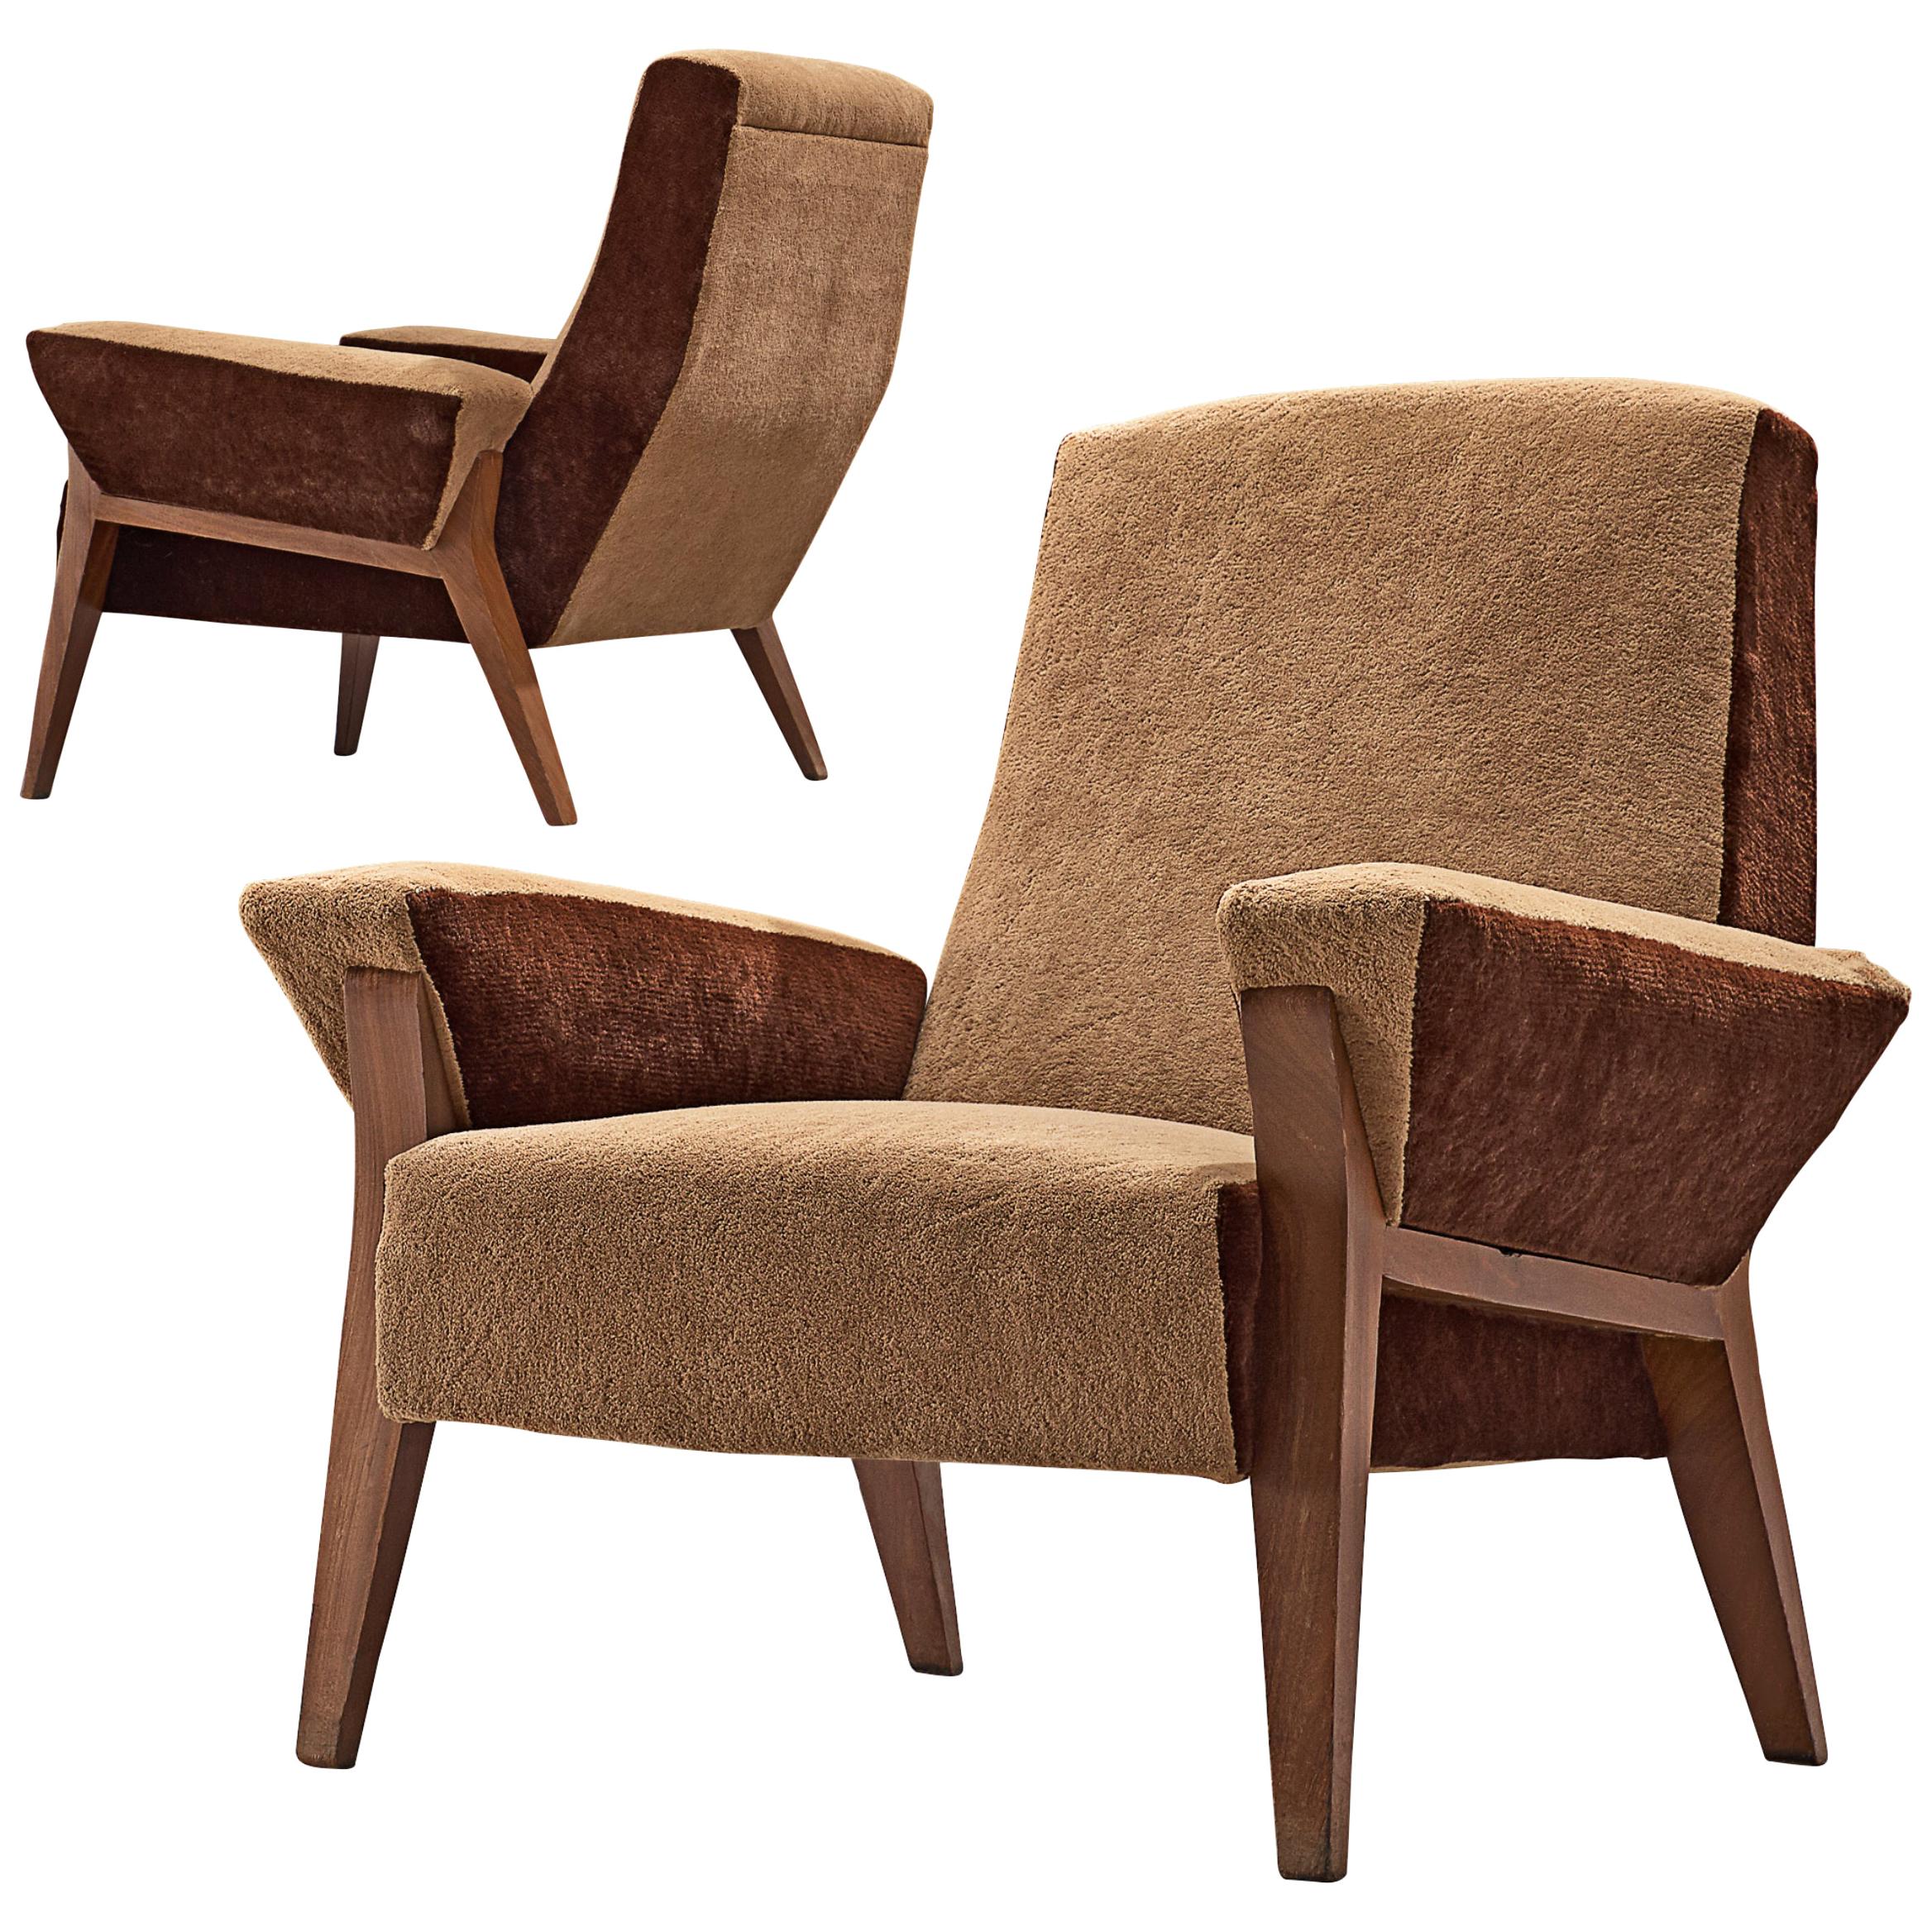 Italian Pair of High Back Lounge Chairs Bicolor Brown Upholstery